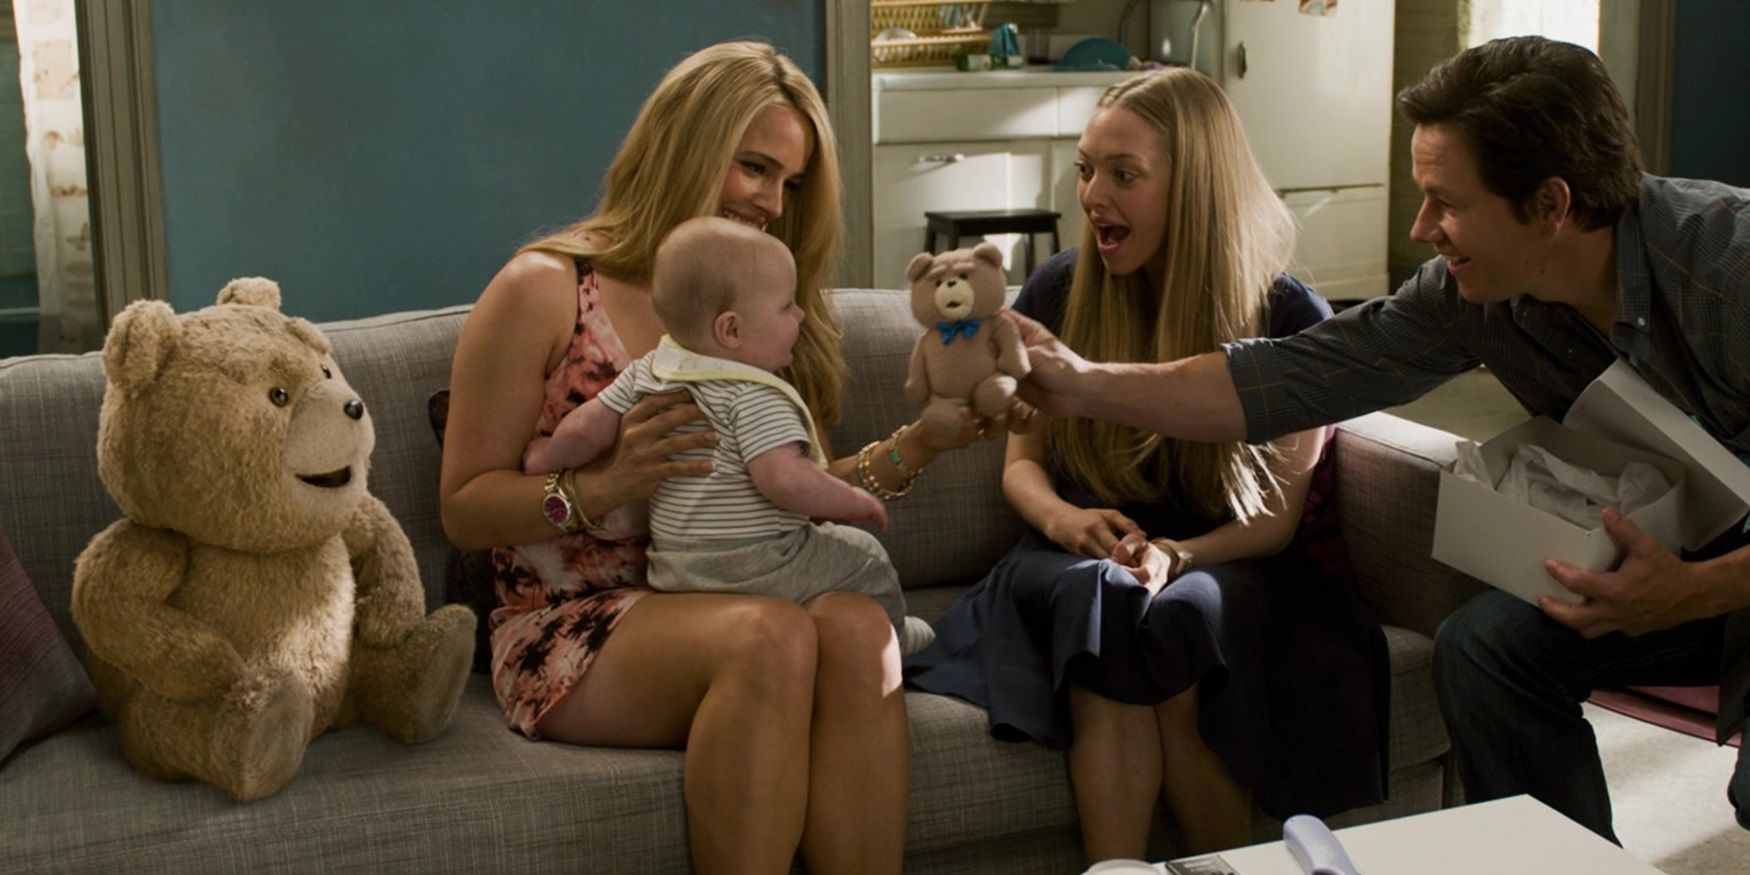 John and Sam meet Ted and Tami-Lynn's baby in Ted 2